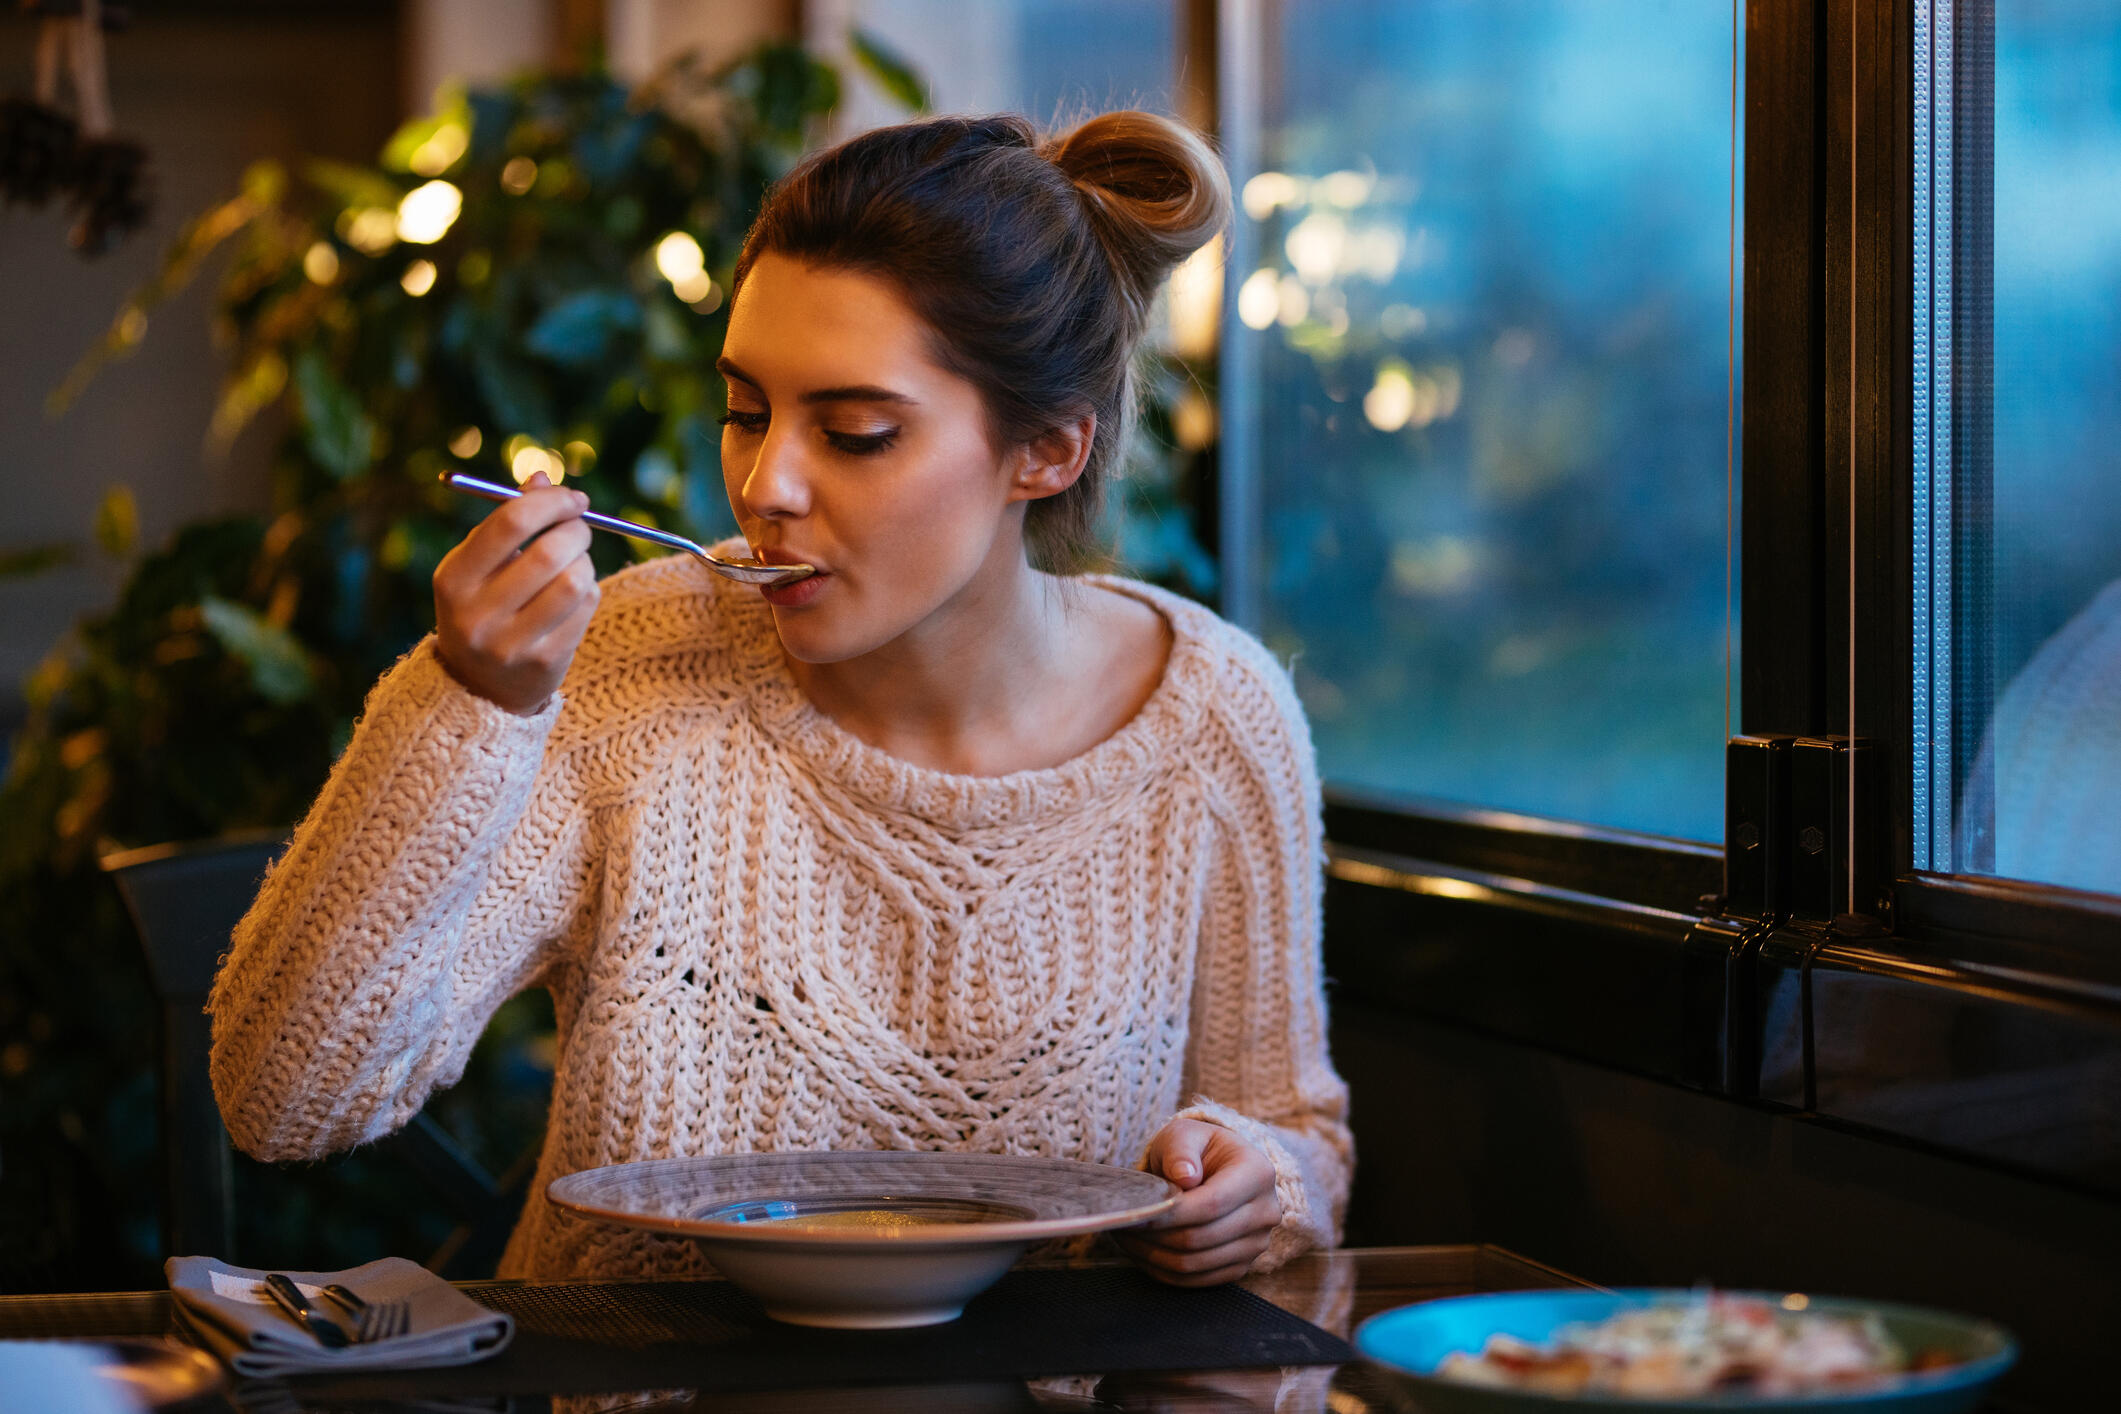 woman eating food from a bowl.